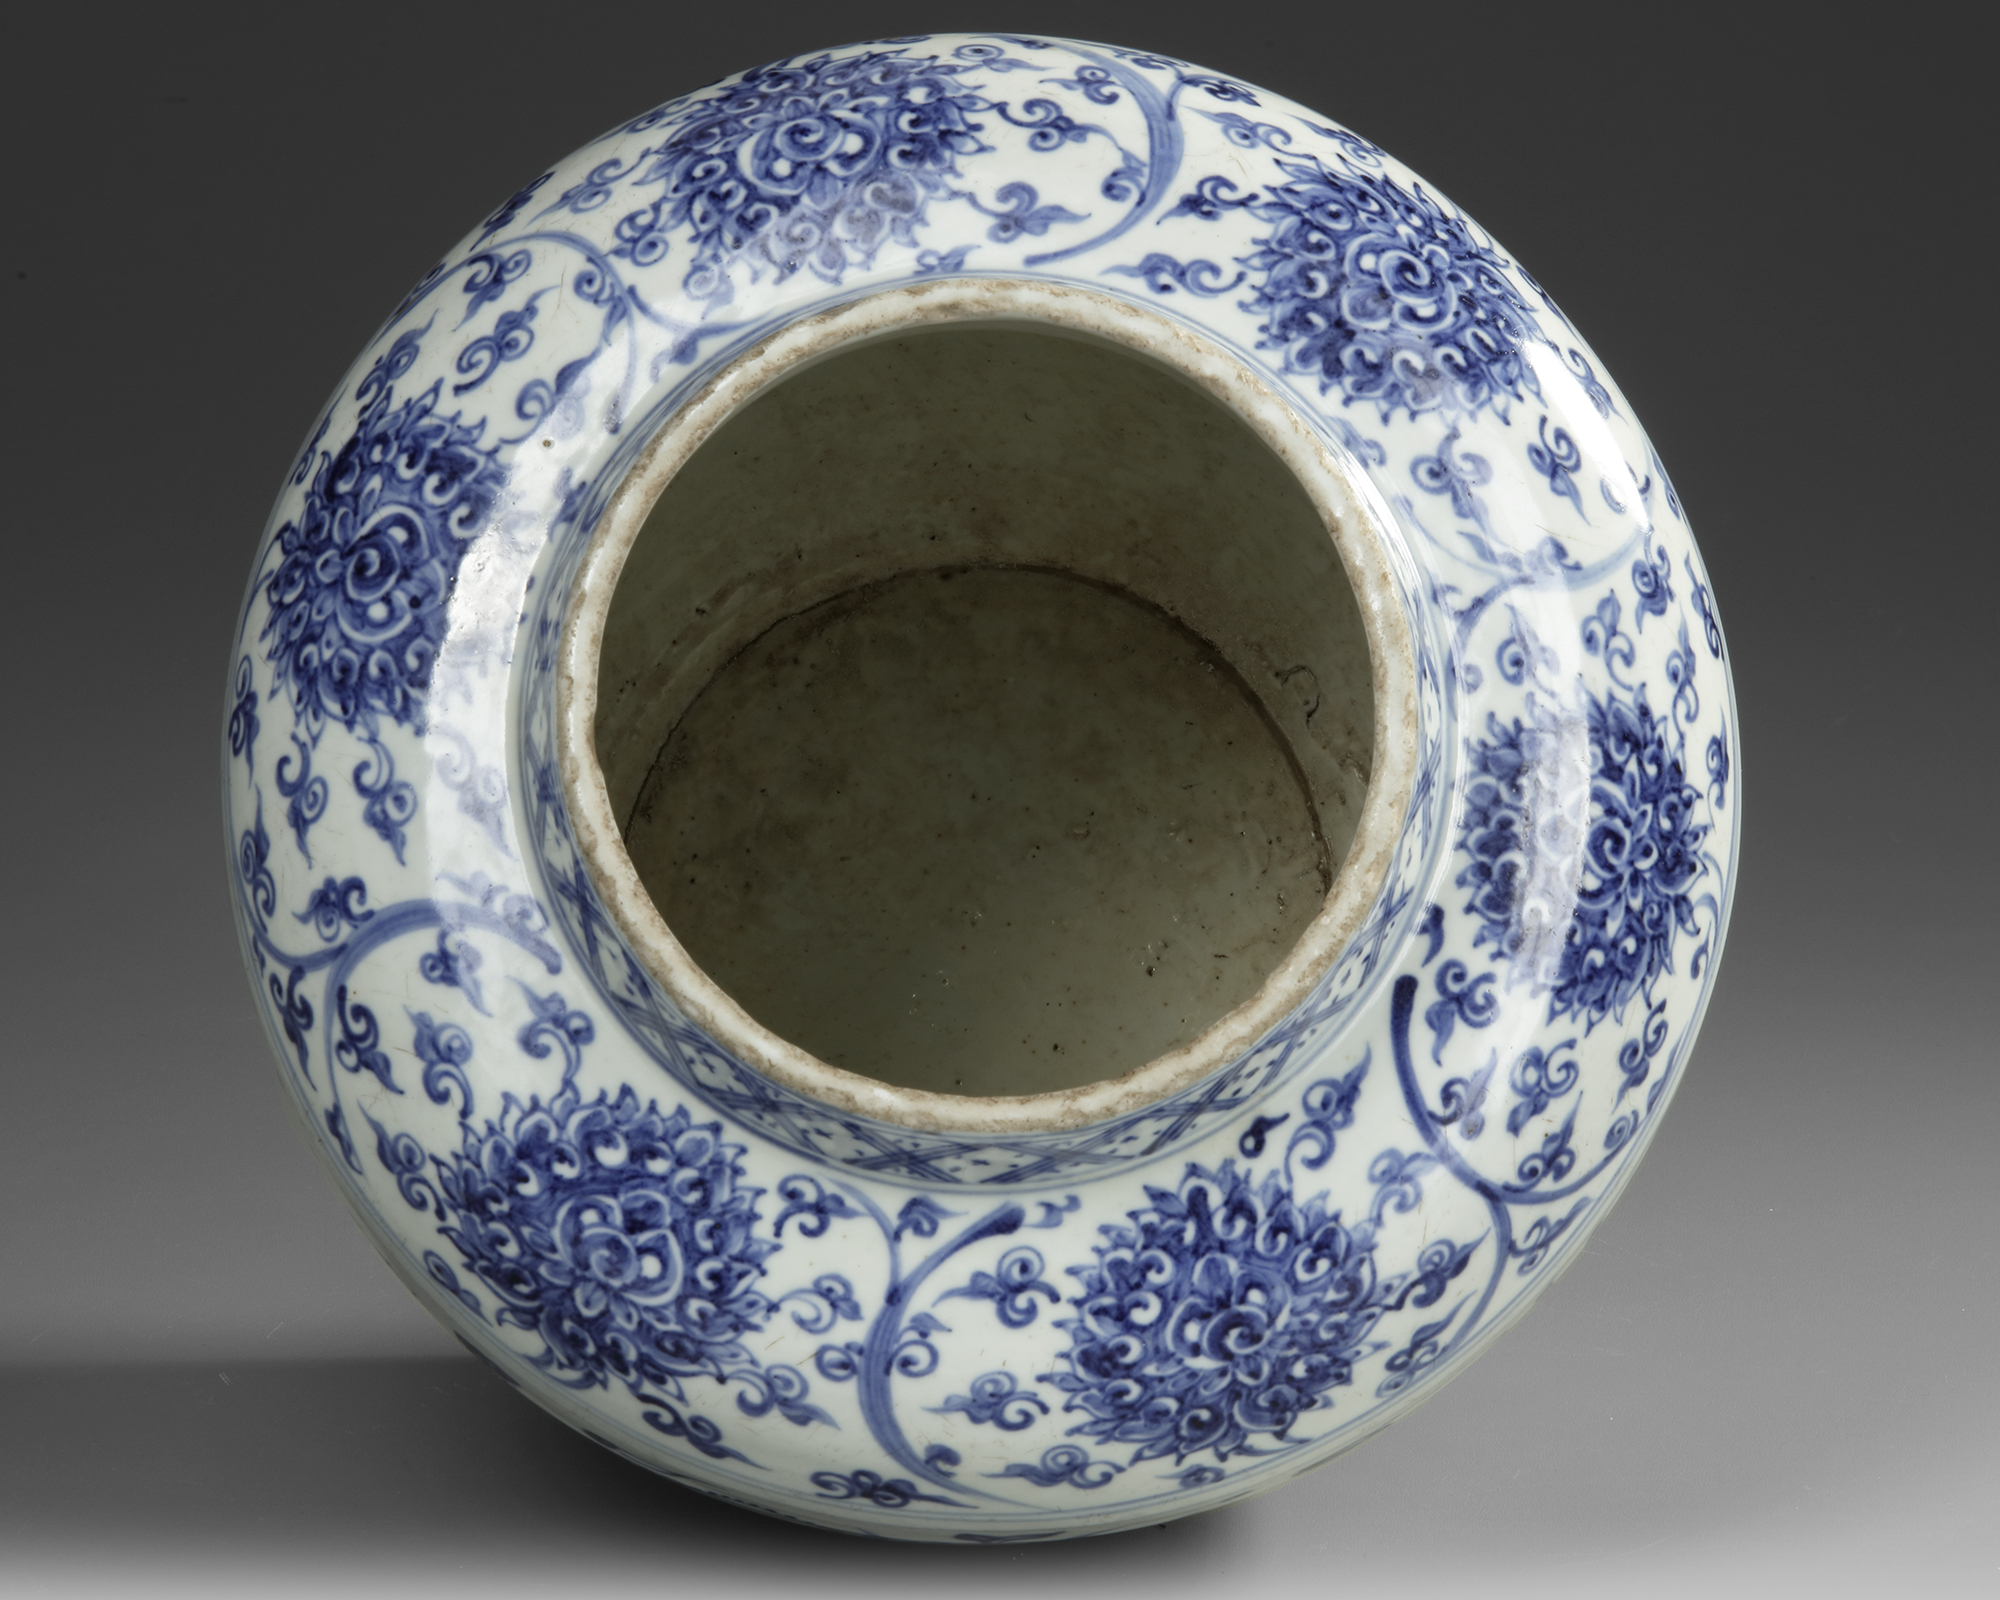 A CHINESE BLUE AND WHITE JAR, MING DYNASTY (1368-1644) OR LATER - Image 3 of 4